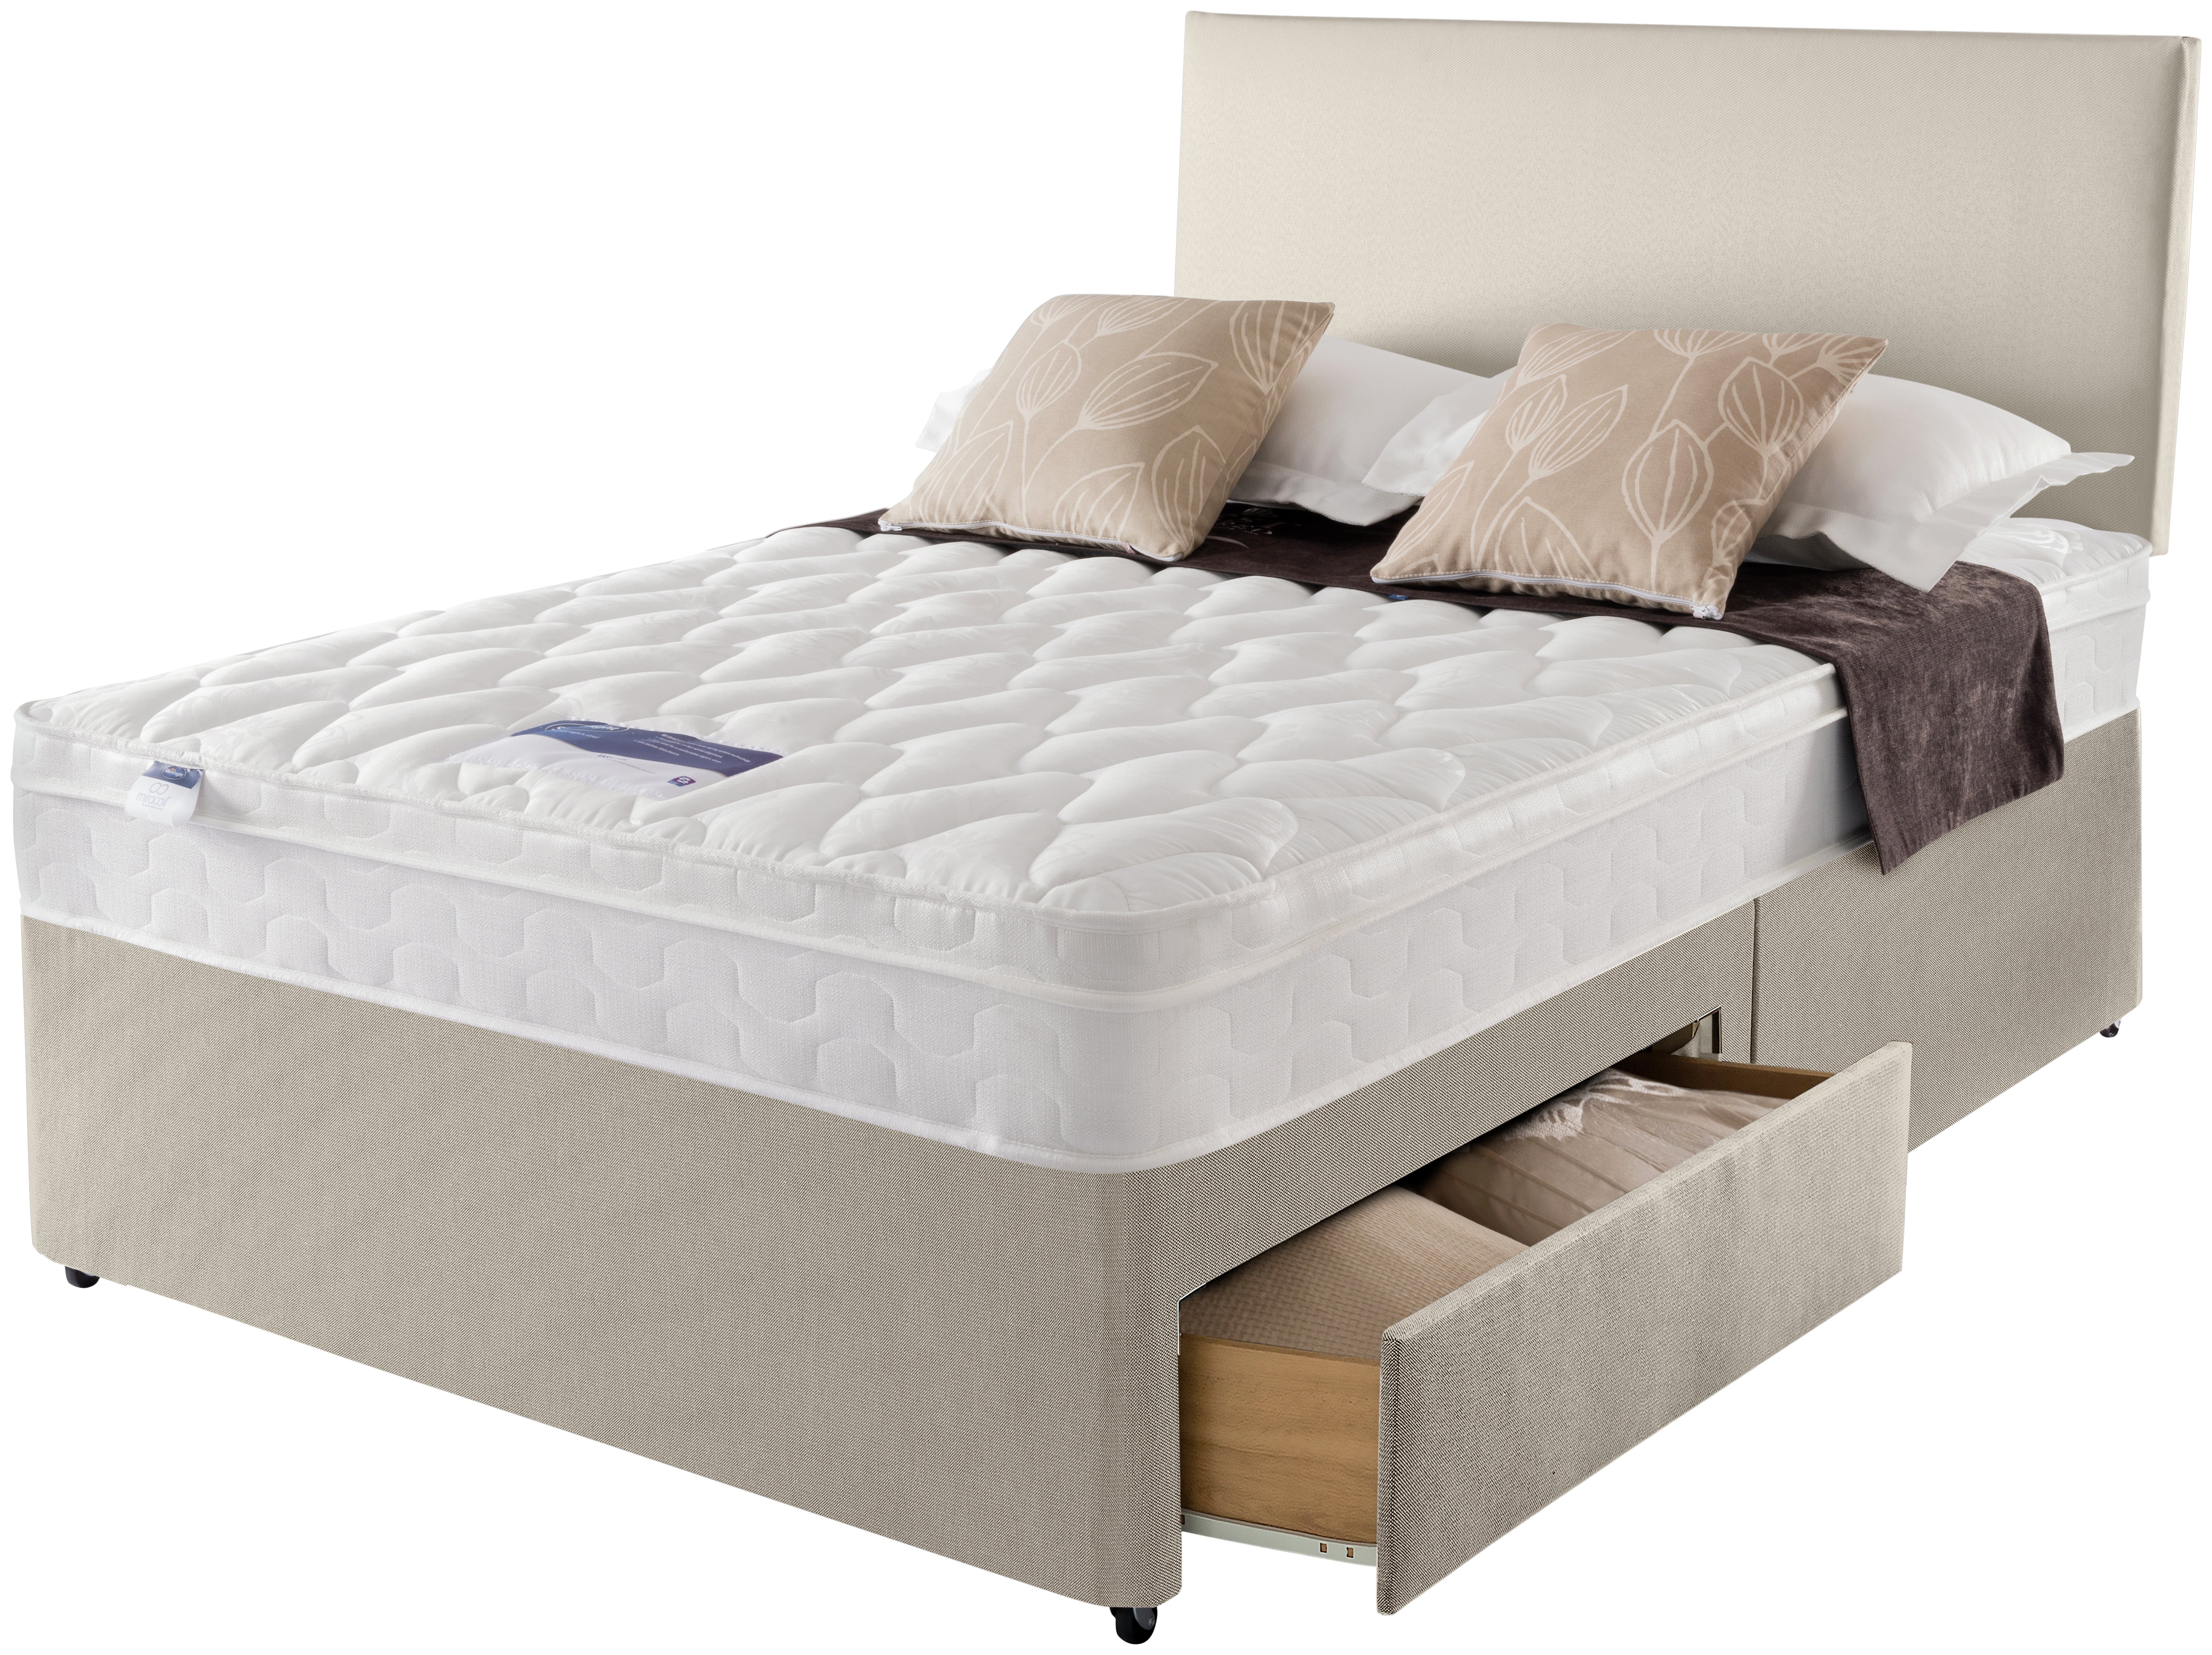 Silentnight Auckland Natural Small Double 4 Drw Divan Bed